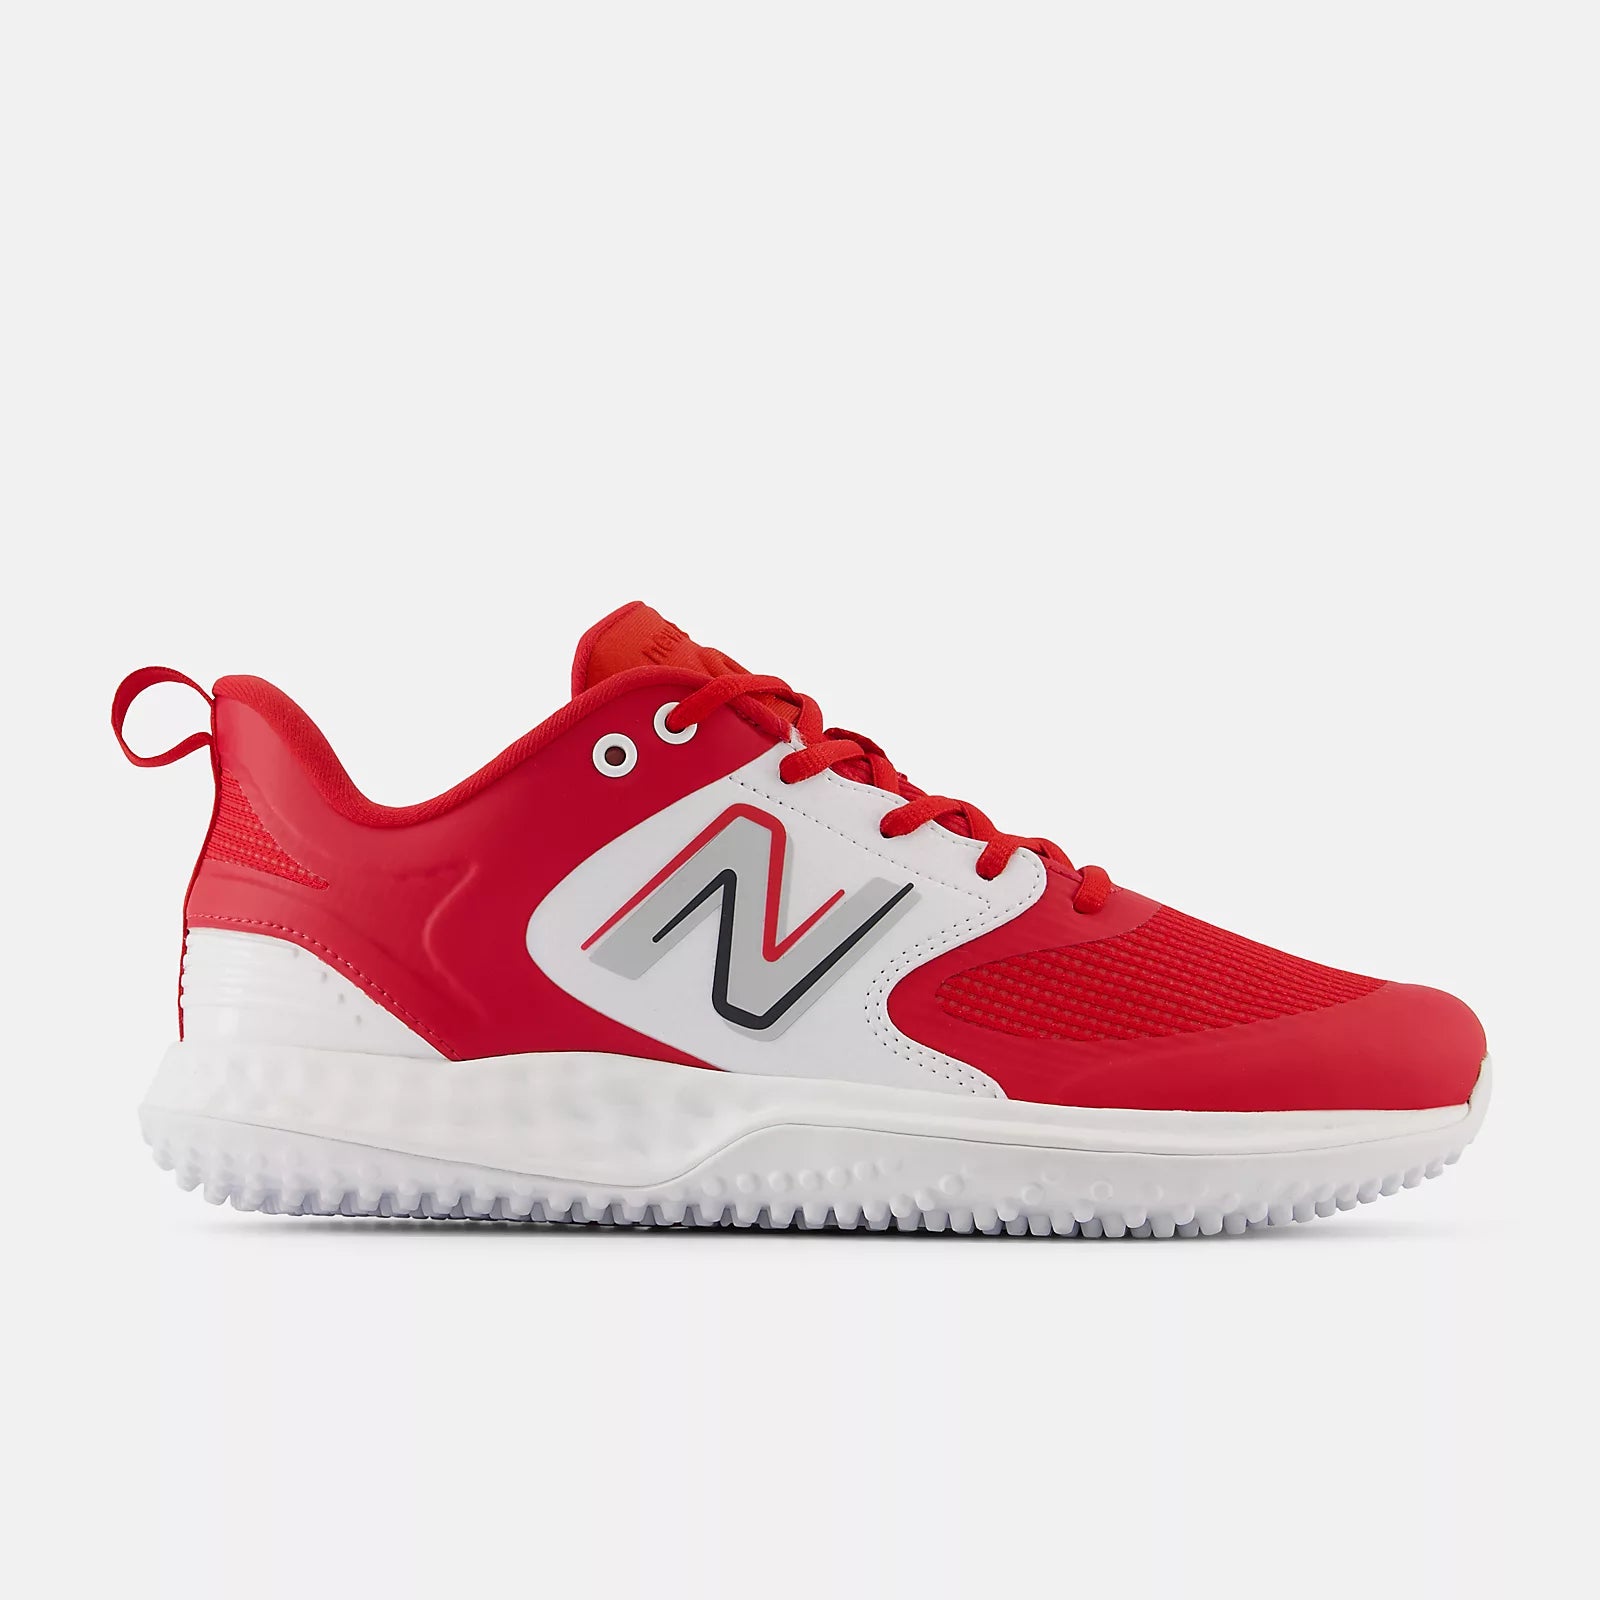 New Balance Red T3000v6 Turf Shoes